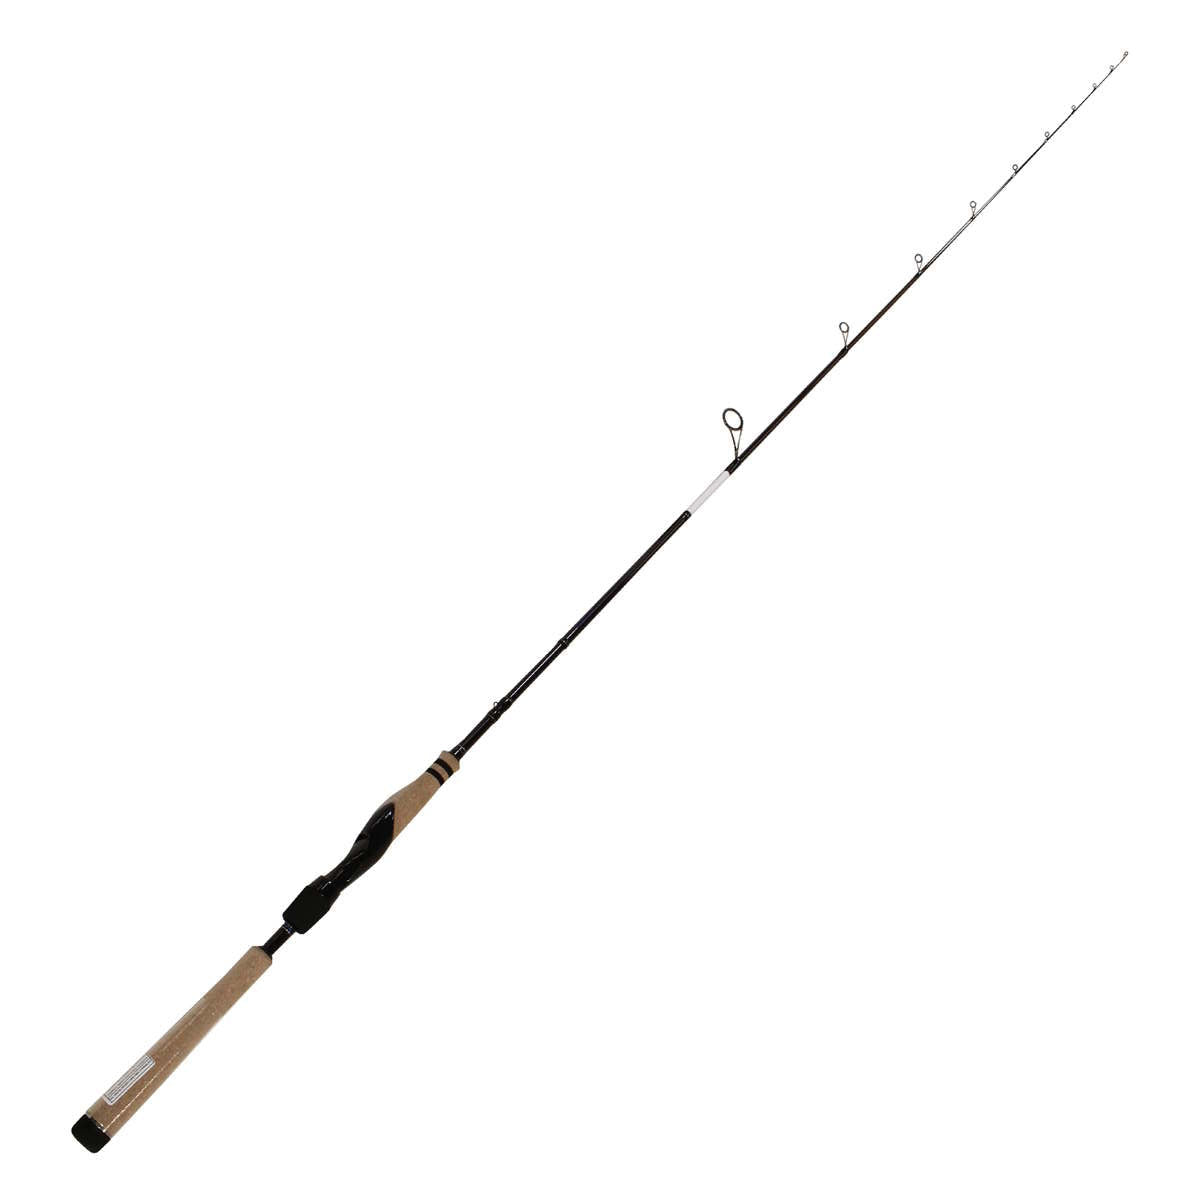 Photo of Daiwa RG Series Walleye Freshwater Spinning Rod for sale at United Tackle Shops.